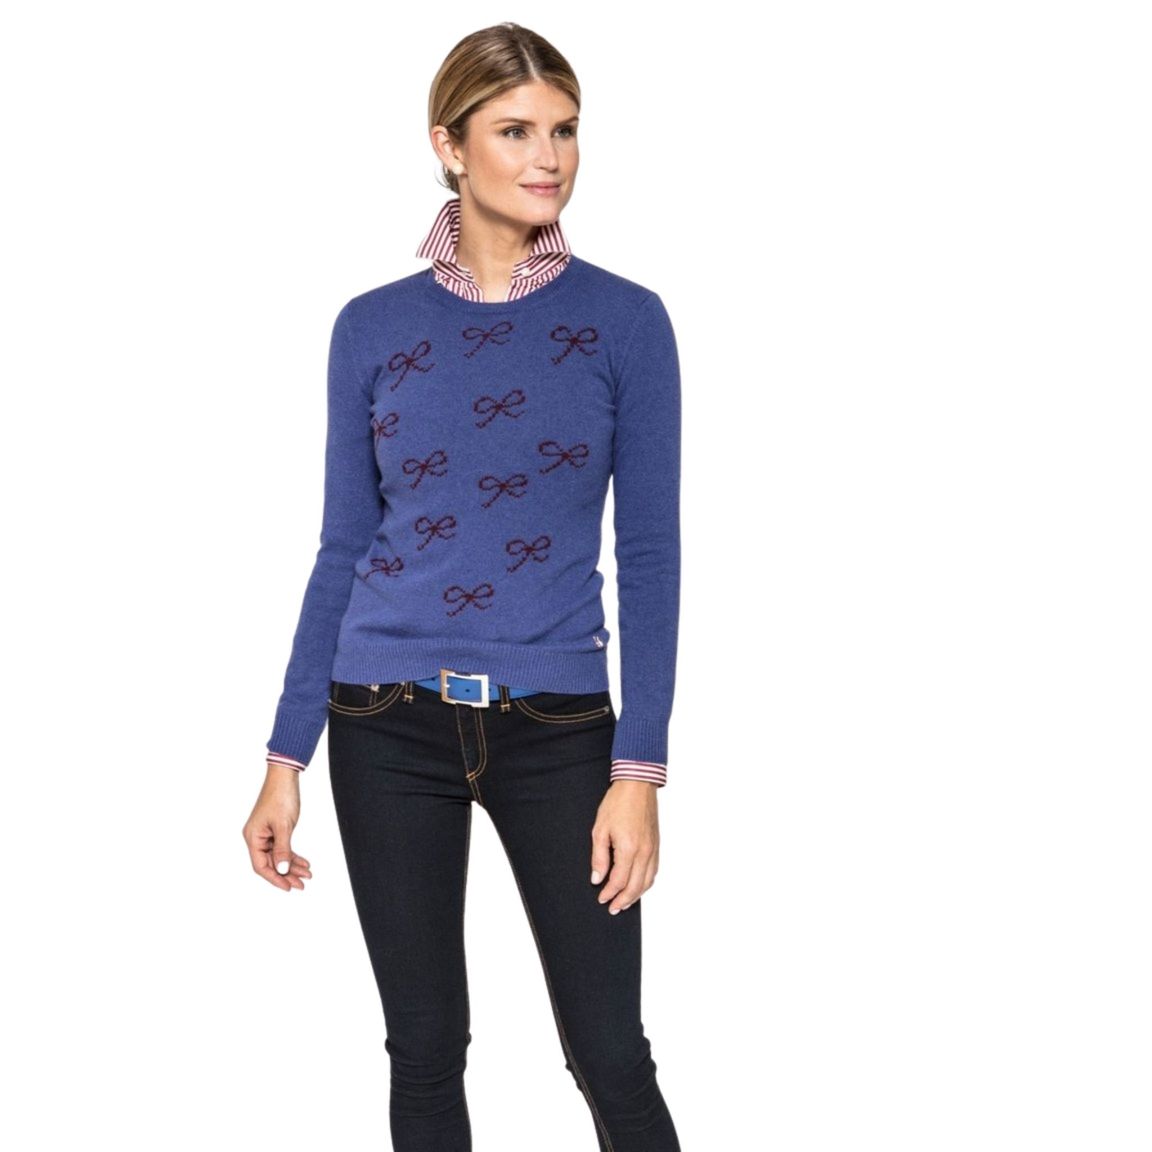 Felicity Sweater in Navy with Burgundy Bows